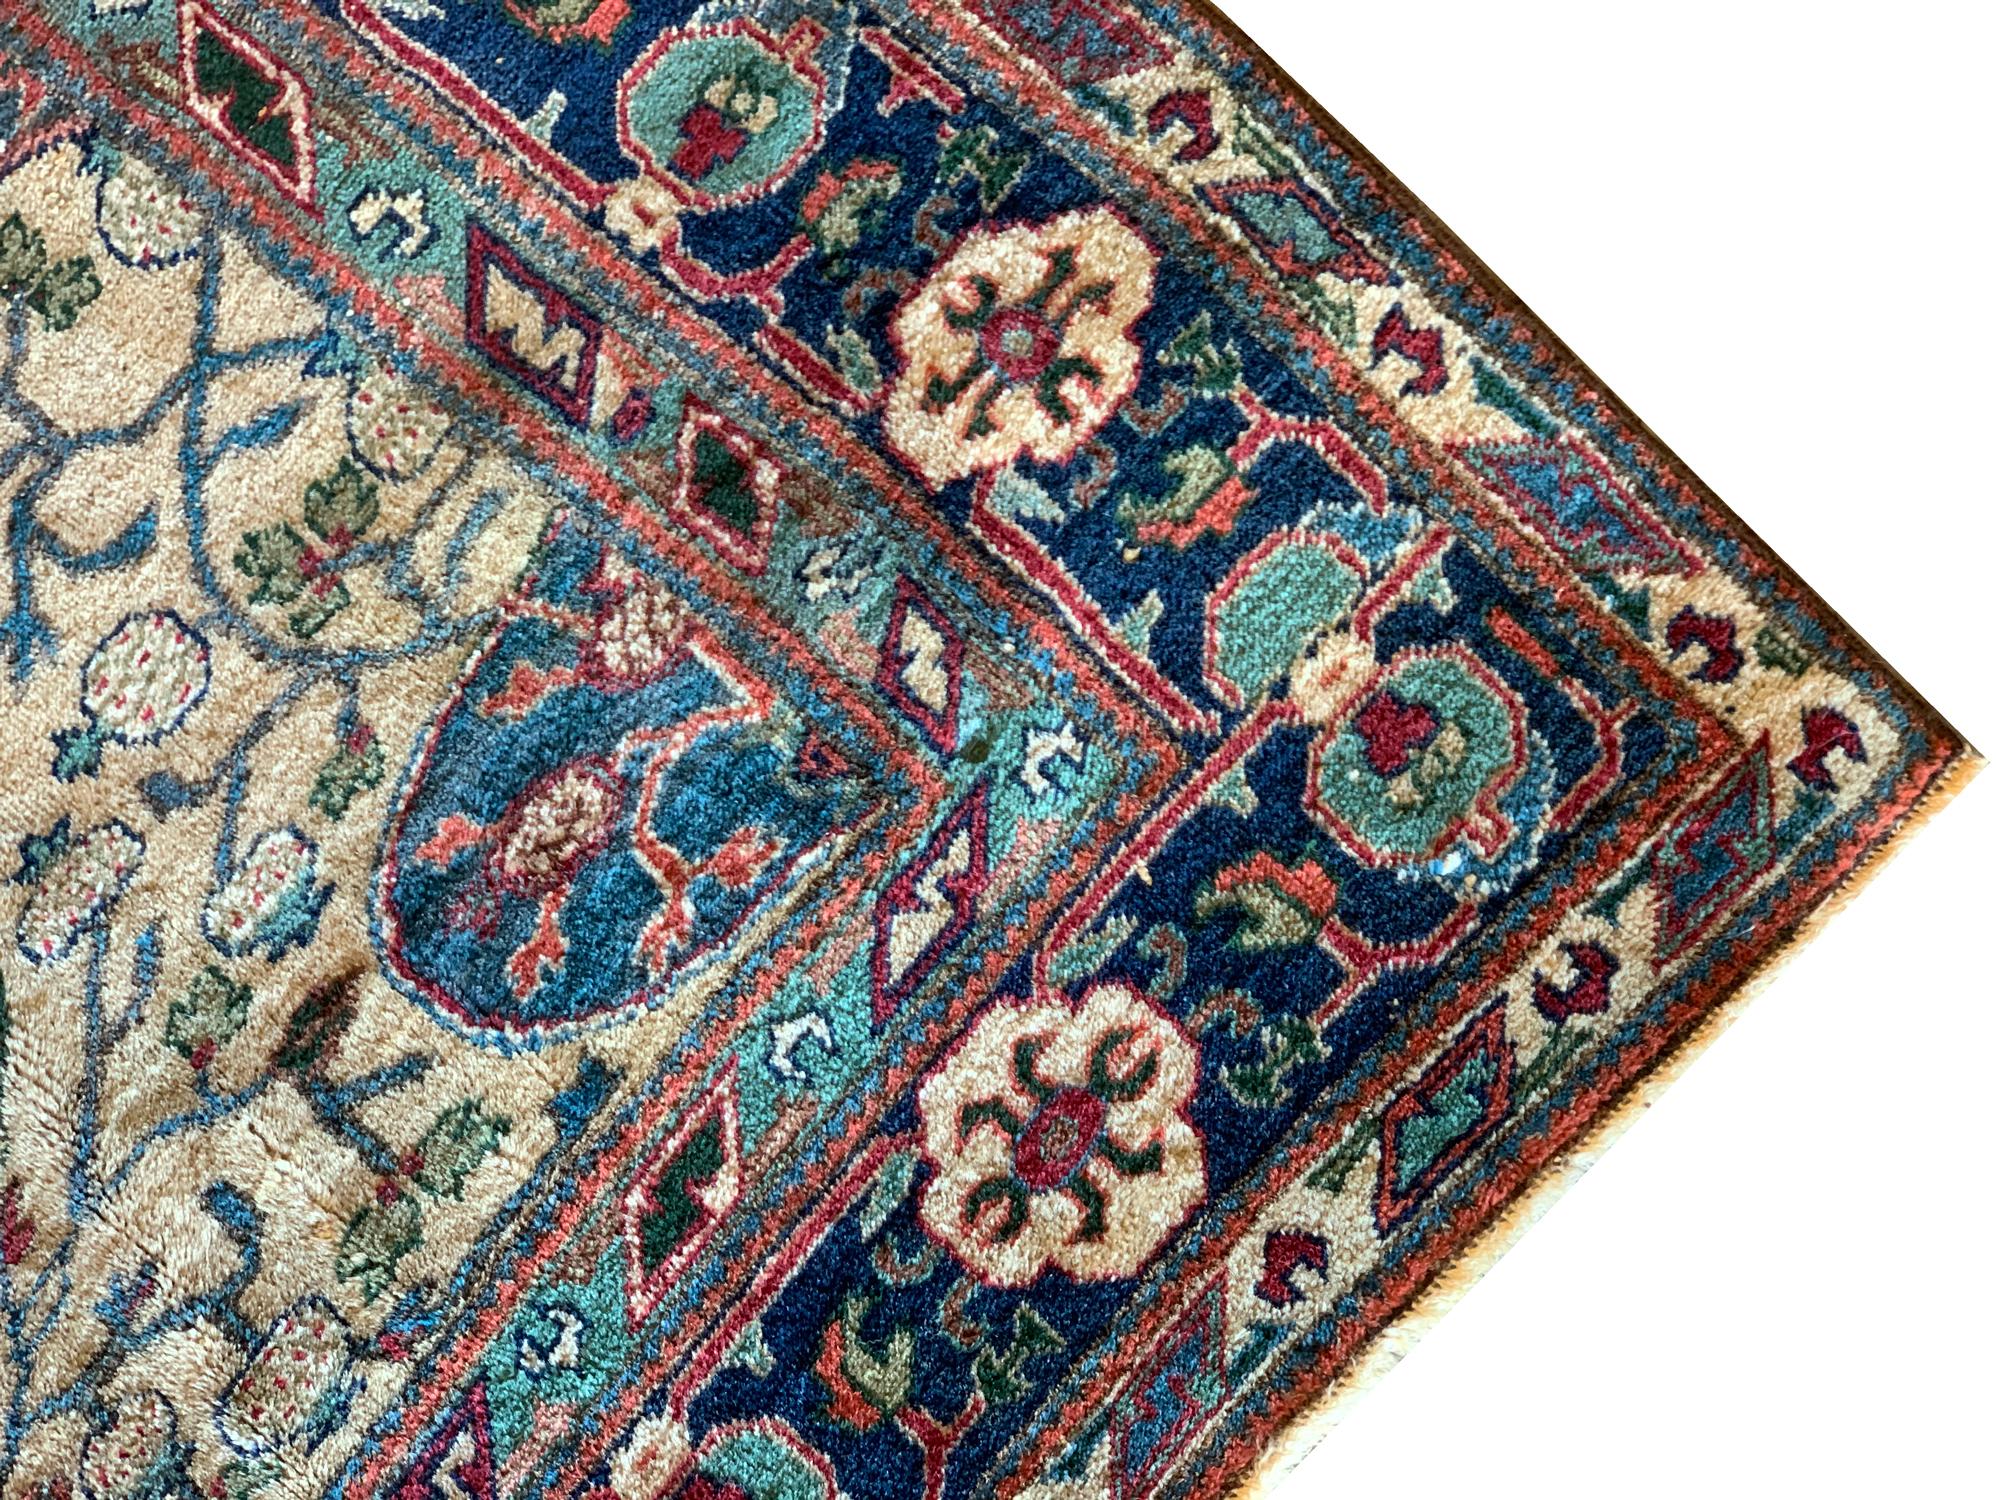 Antique Rugs Central Asian Khotan Carpet Handmade Oriental Area Rug In Excellent Condition For Sale In Hampshire, GB